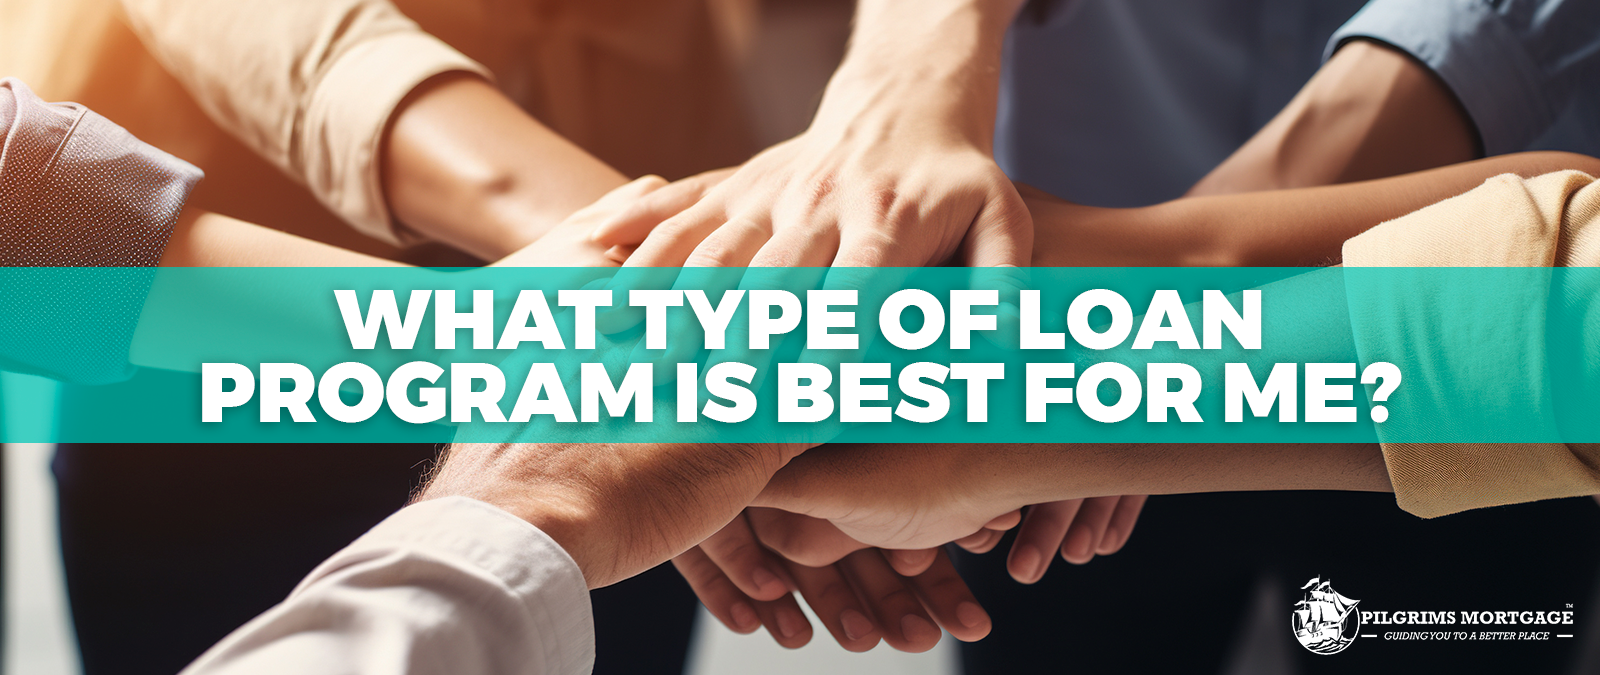 WHAT TYPE OF LOAN PROGRAM IS BEST FOR ME?